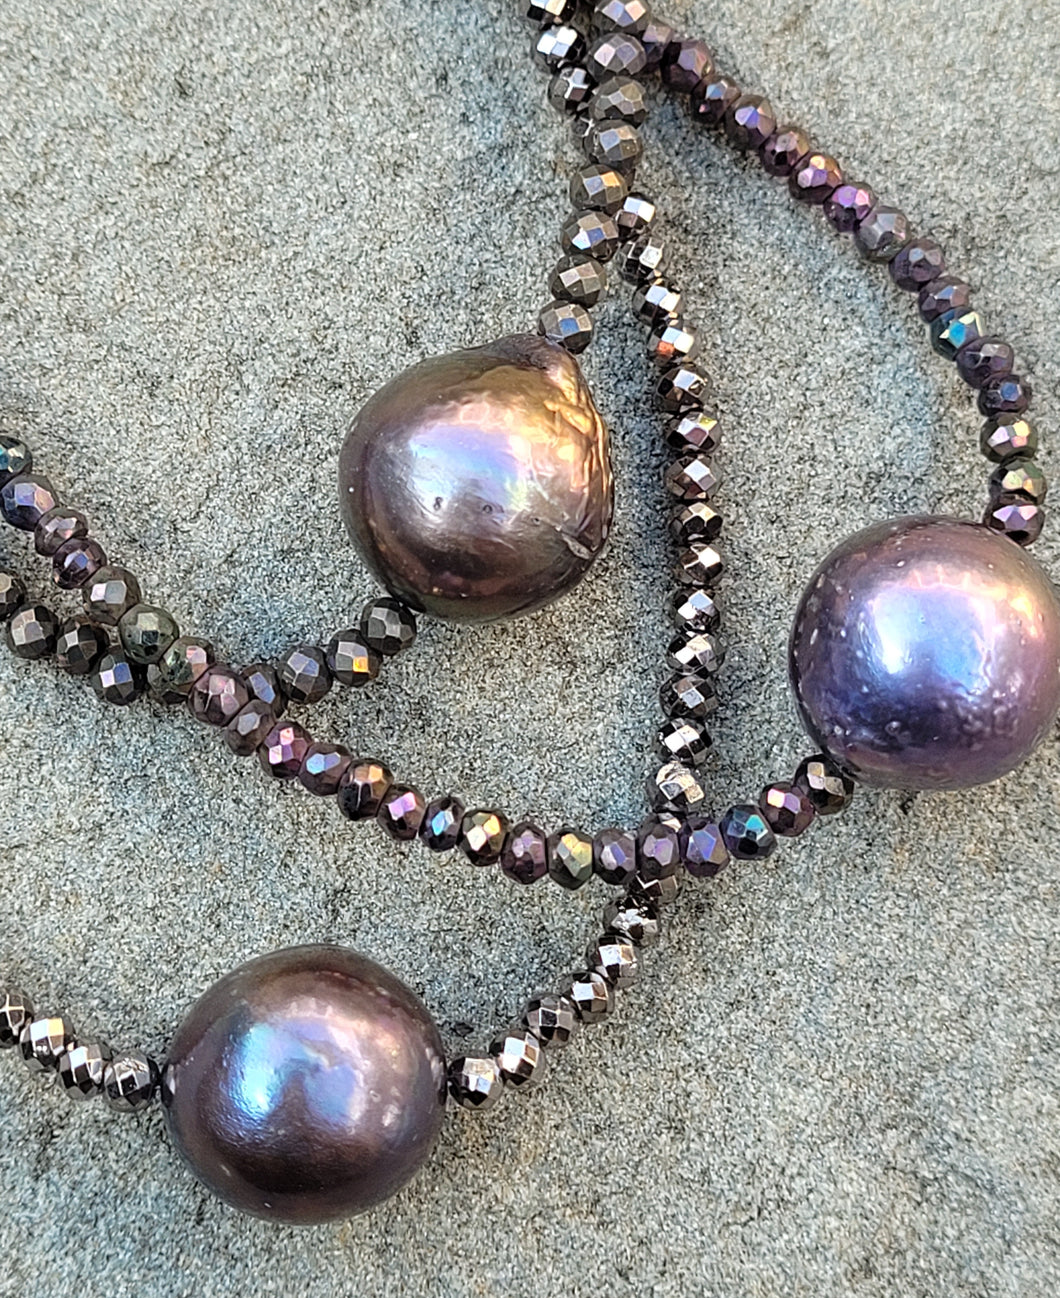 Pyrite and Pearl Necklace